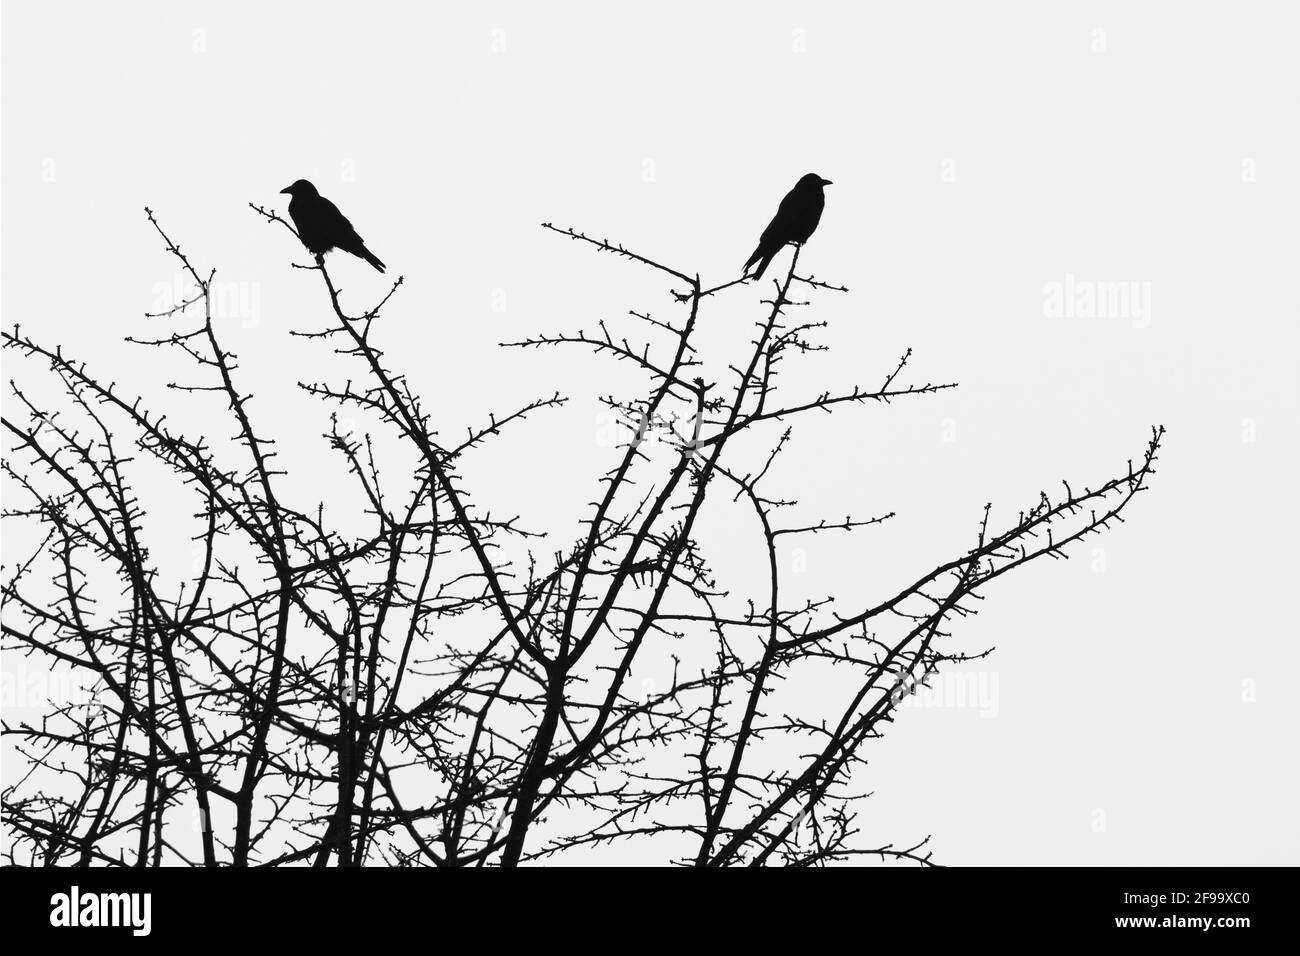 Carrion crows (Corvus corone) on a tree, winter, Hesse, Germany Stock Photo